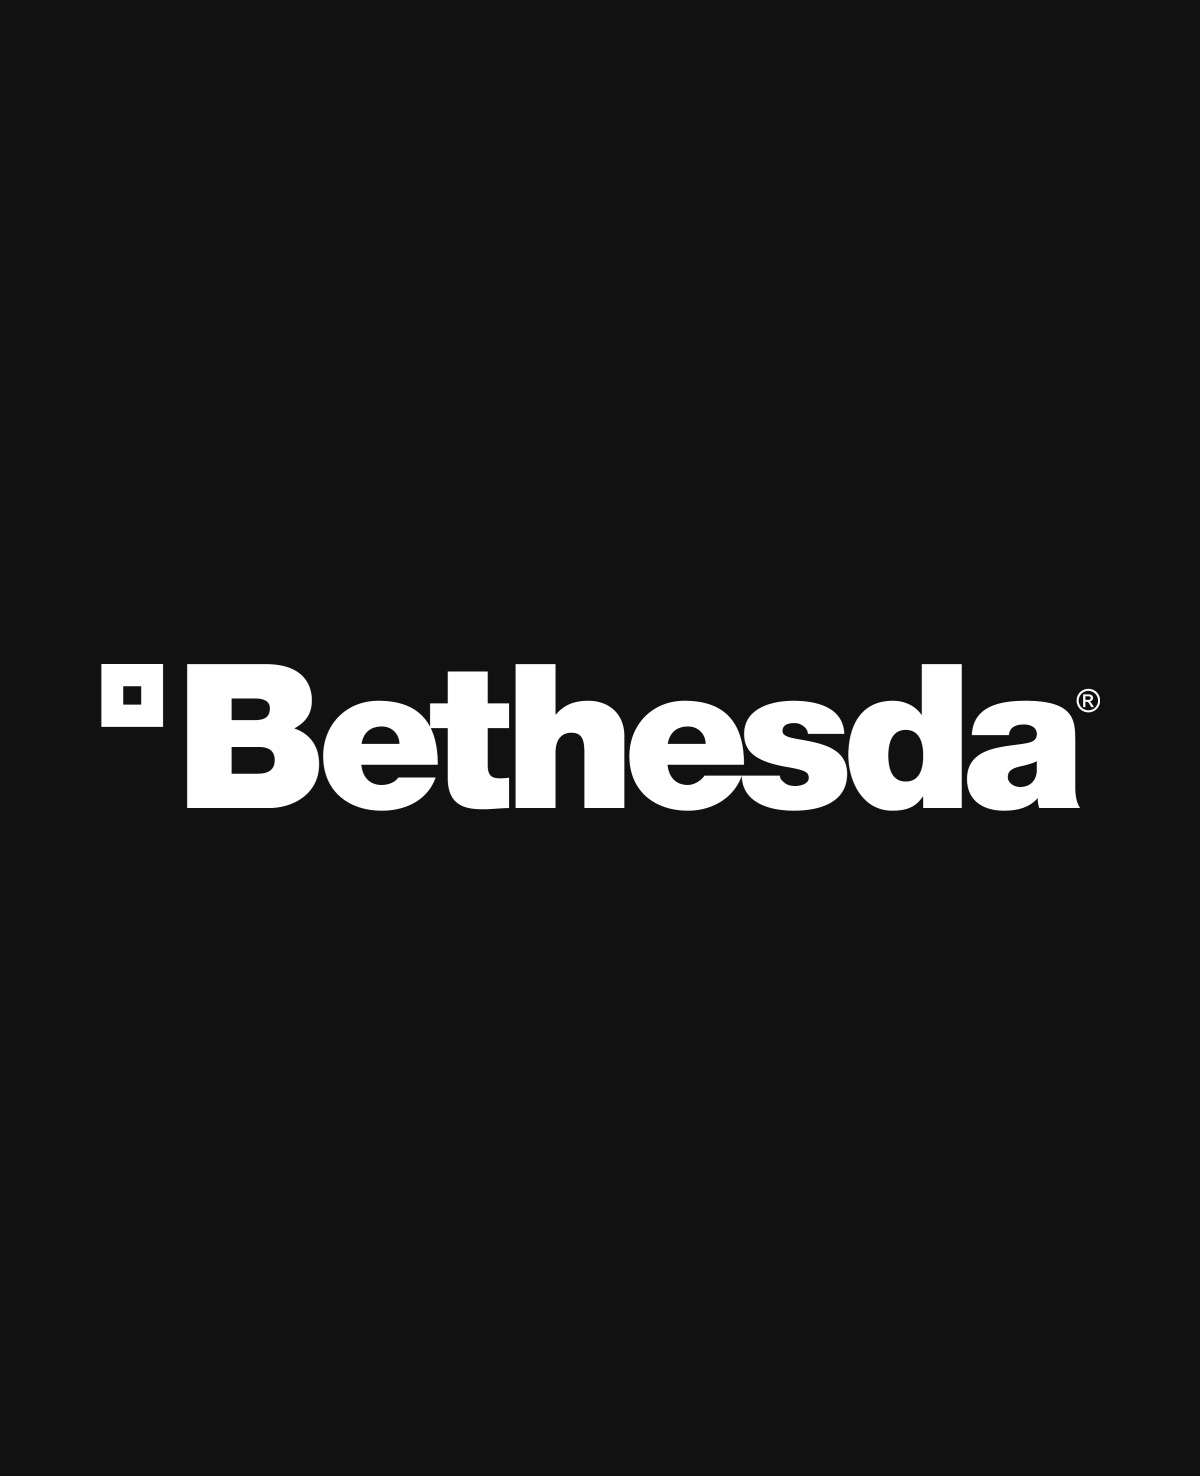 Bethesda Softworks says it still plans to support and update